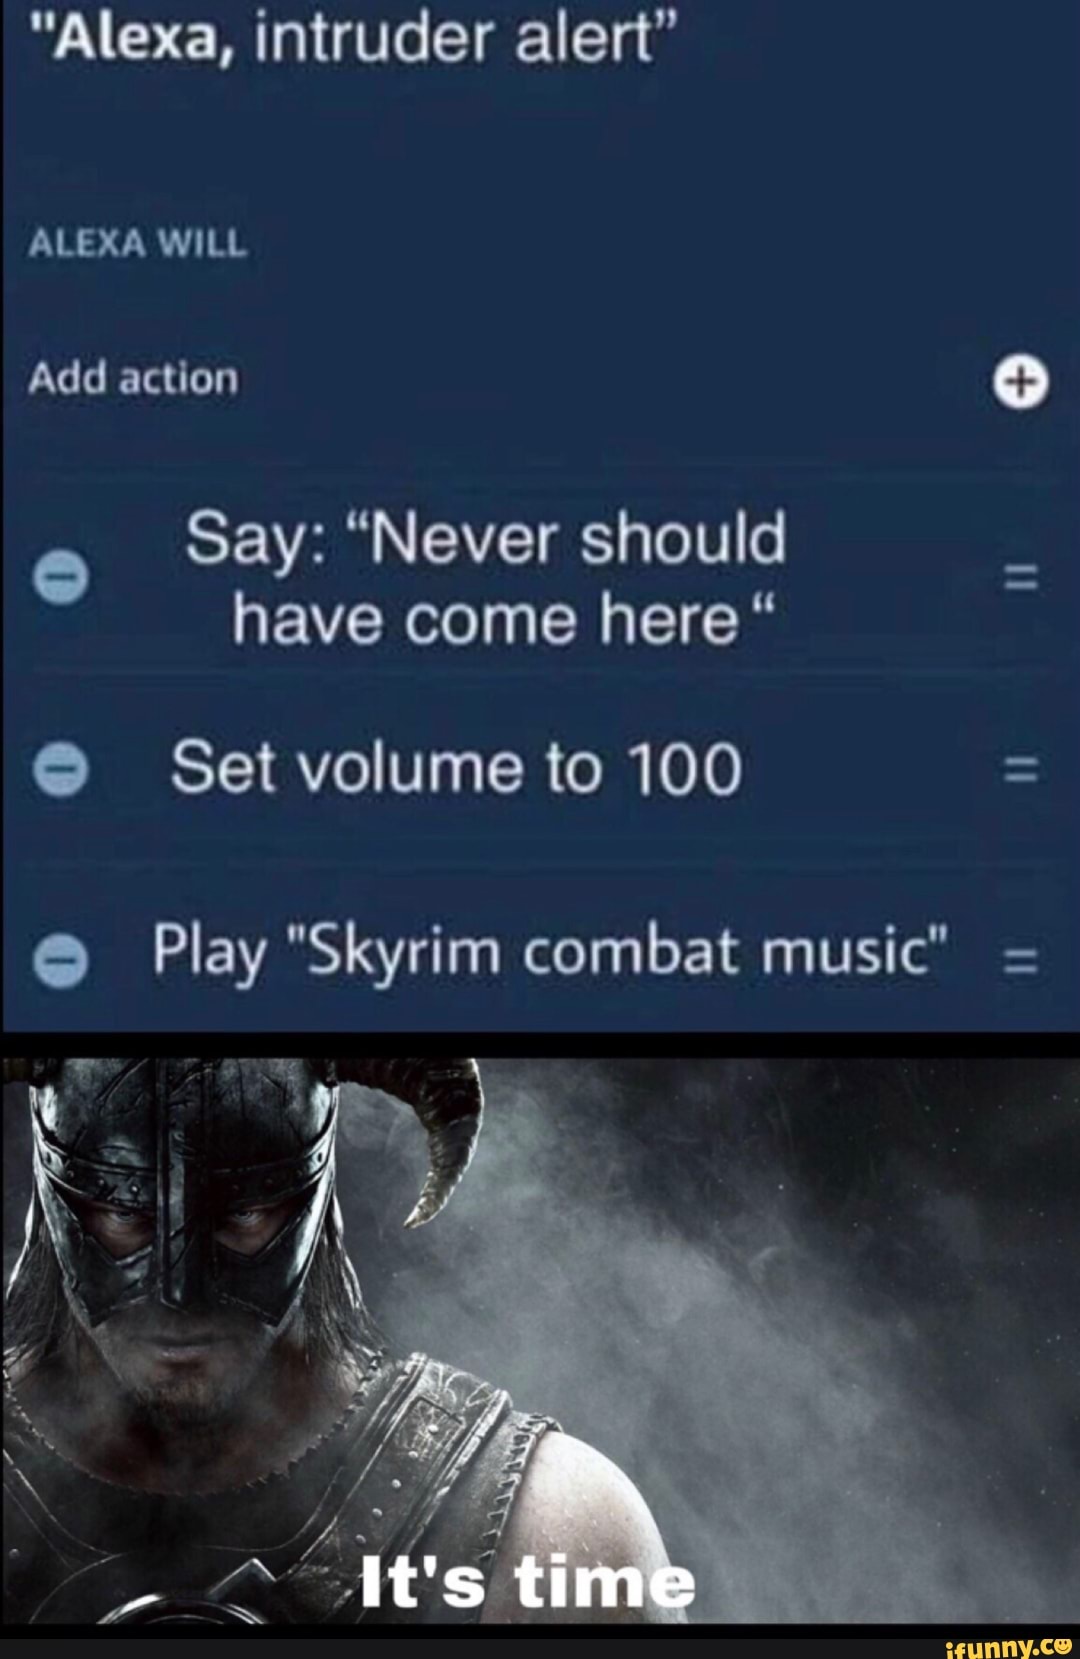 Alexa, alert” ALEXA WILL Add action Say: should come here“ a Play "Skyrim combat music" - iFunny Brazil